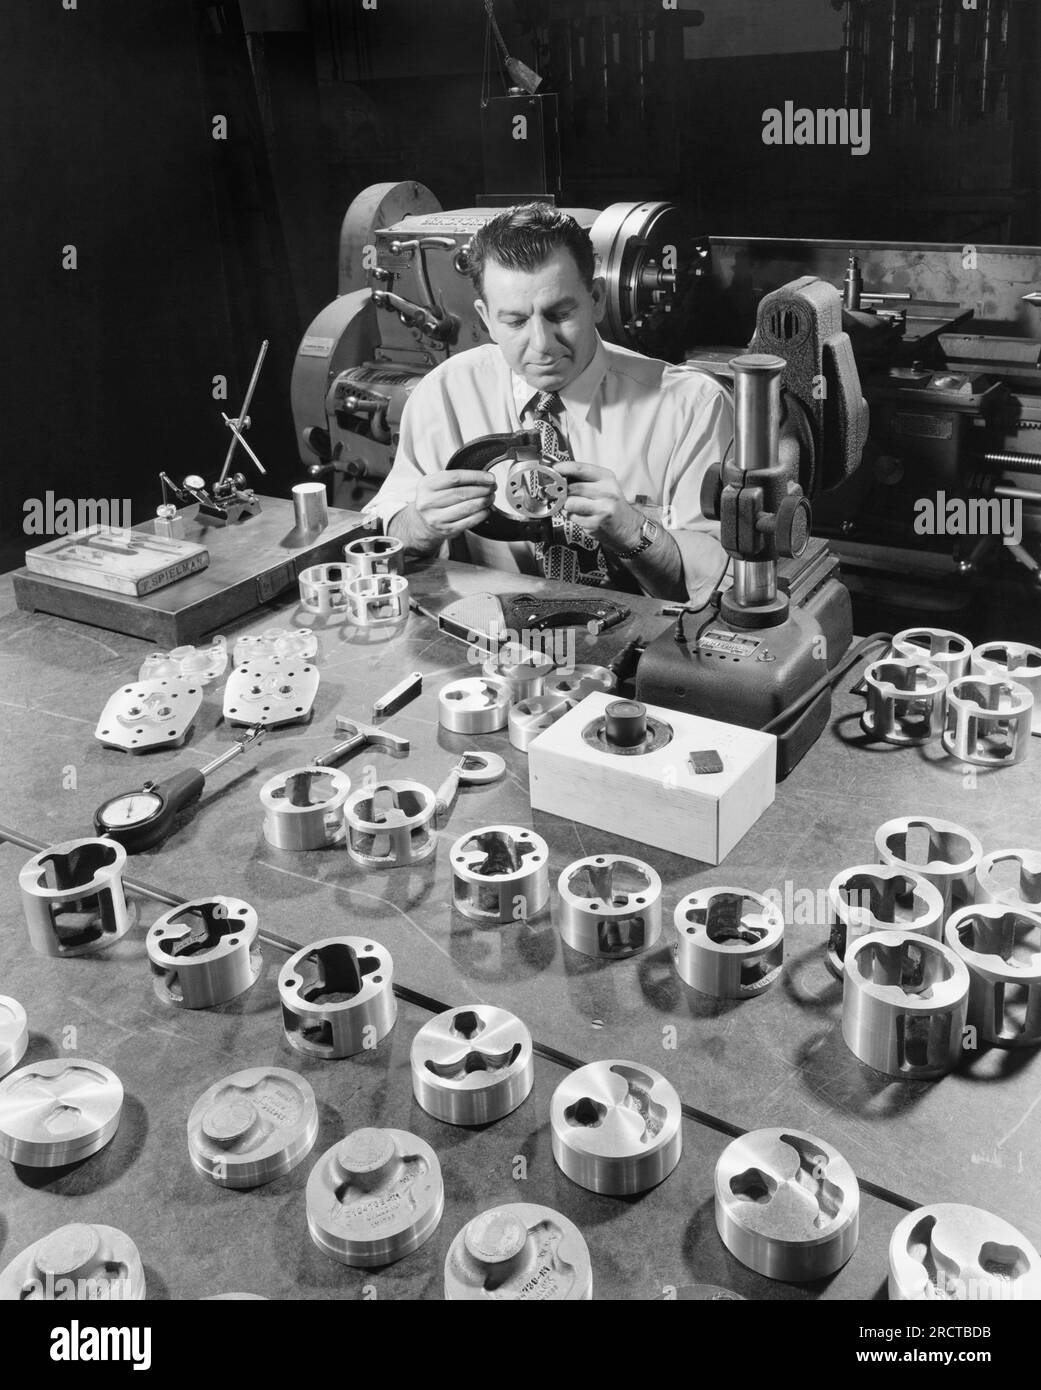 United States:   c. 1947 A quality control inspector uses a caliper to check housing parts used in Chevrolet manufacturing. Stock Photo